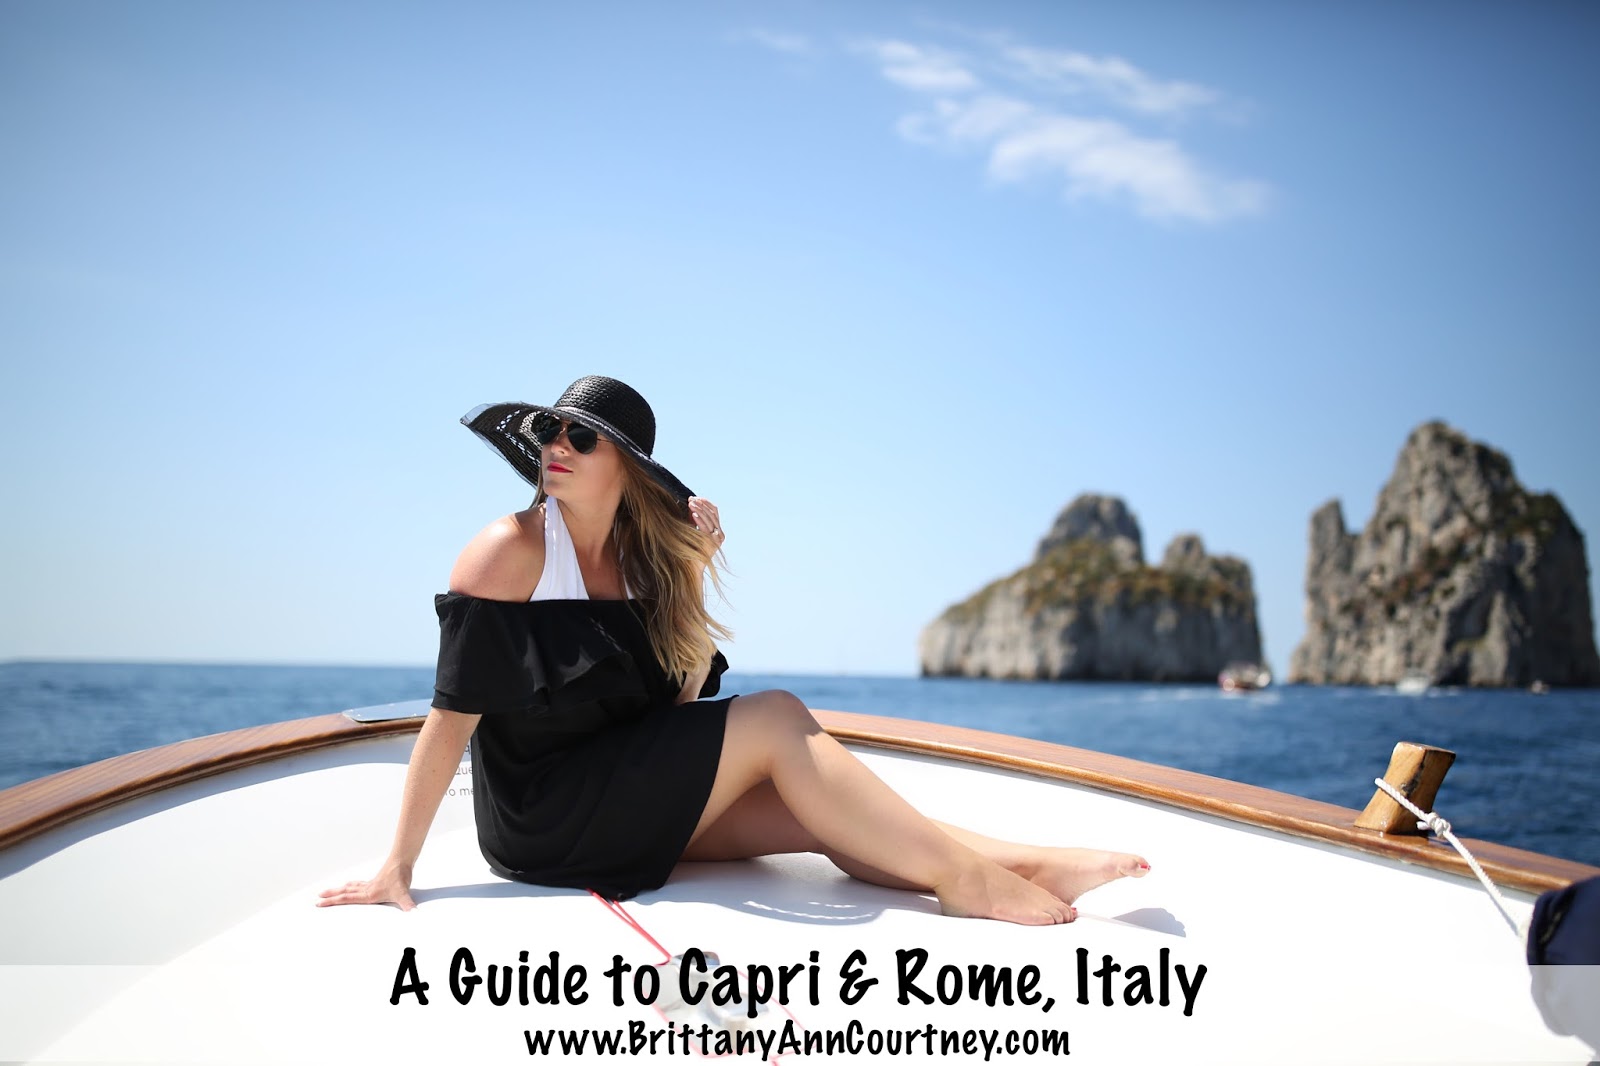 7 Day Travel Guide to Capri & Rome, Italy